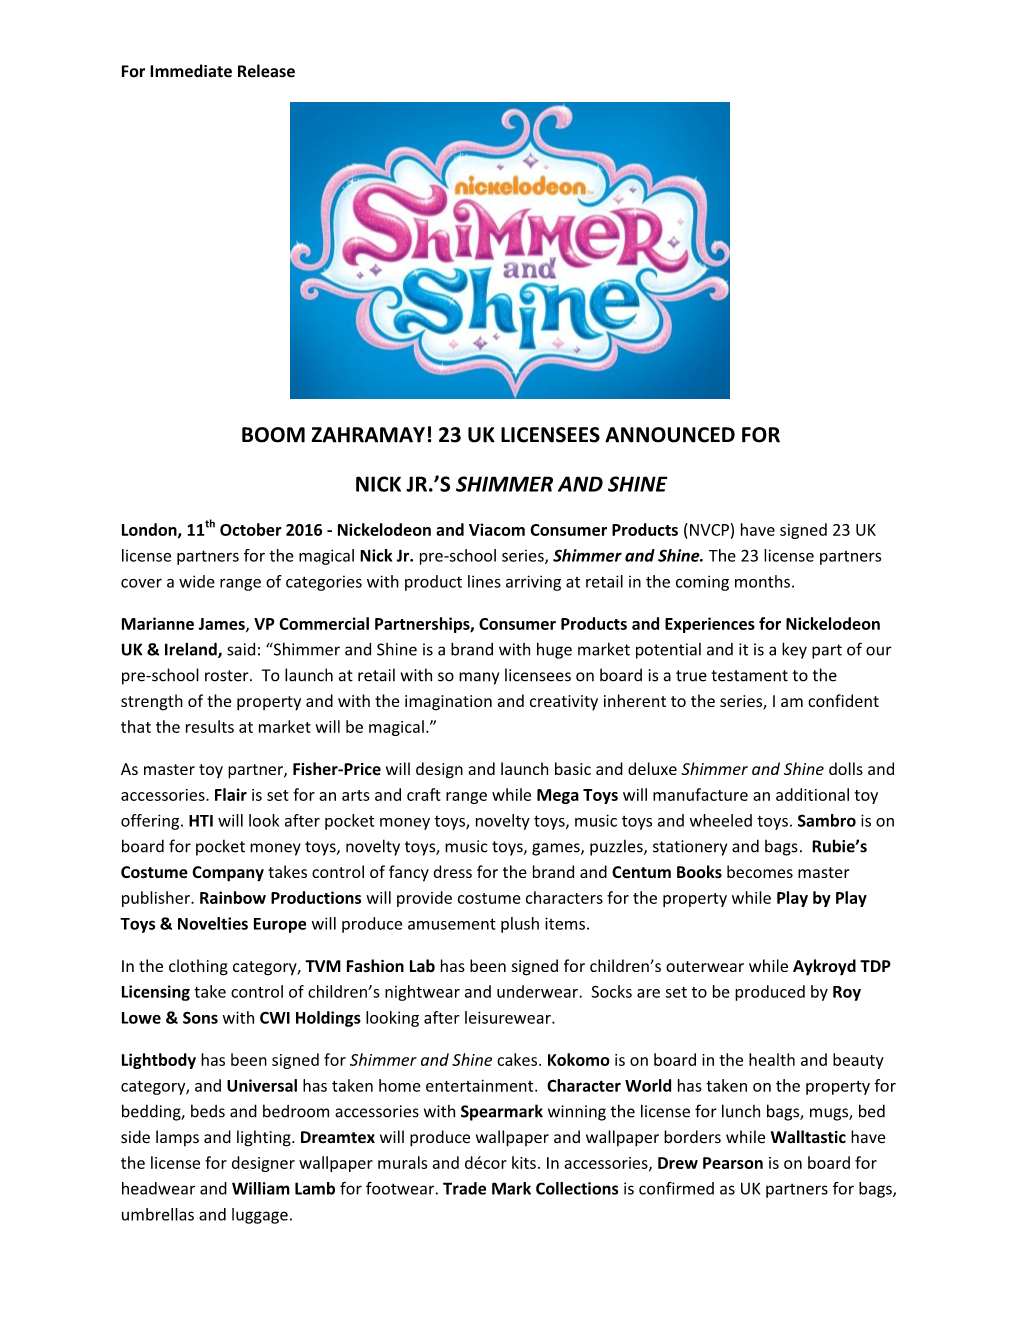 23 Uk Licensees Announced for Nick Jr.'S Shimmer and Shine